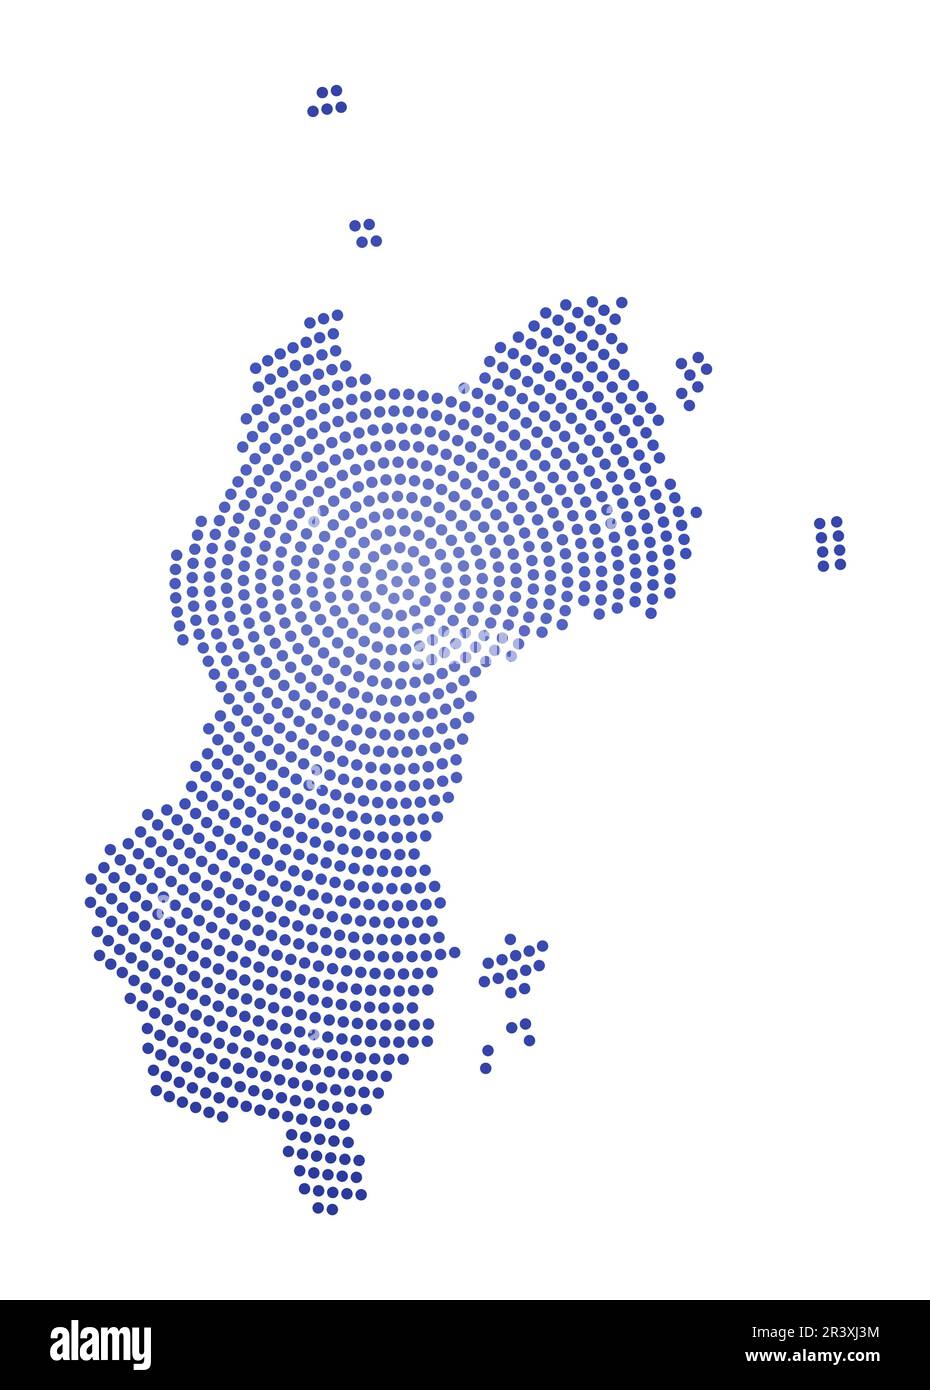 Mustique dotted map. Digital style shape of Mustique. Tech icon of the ...